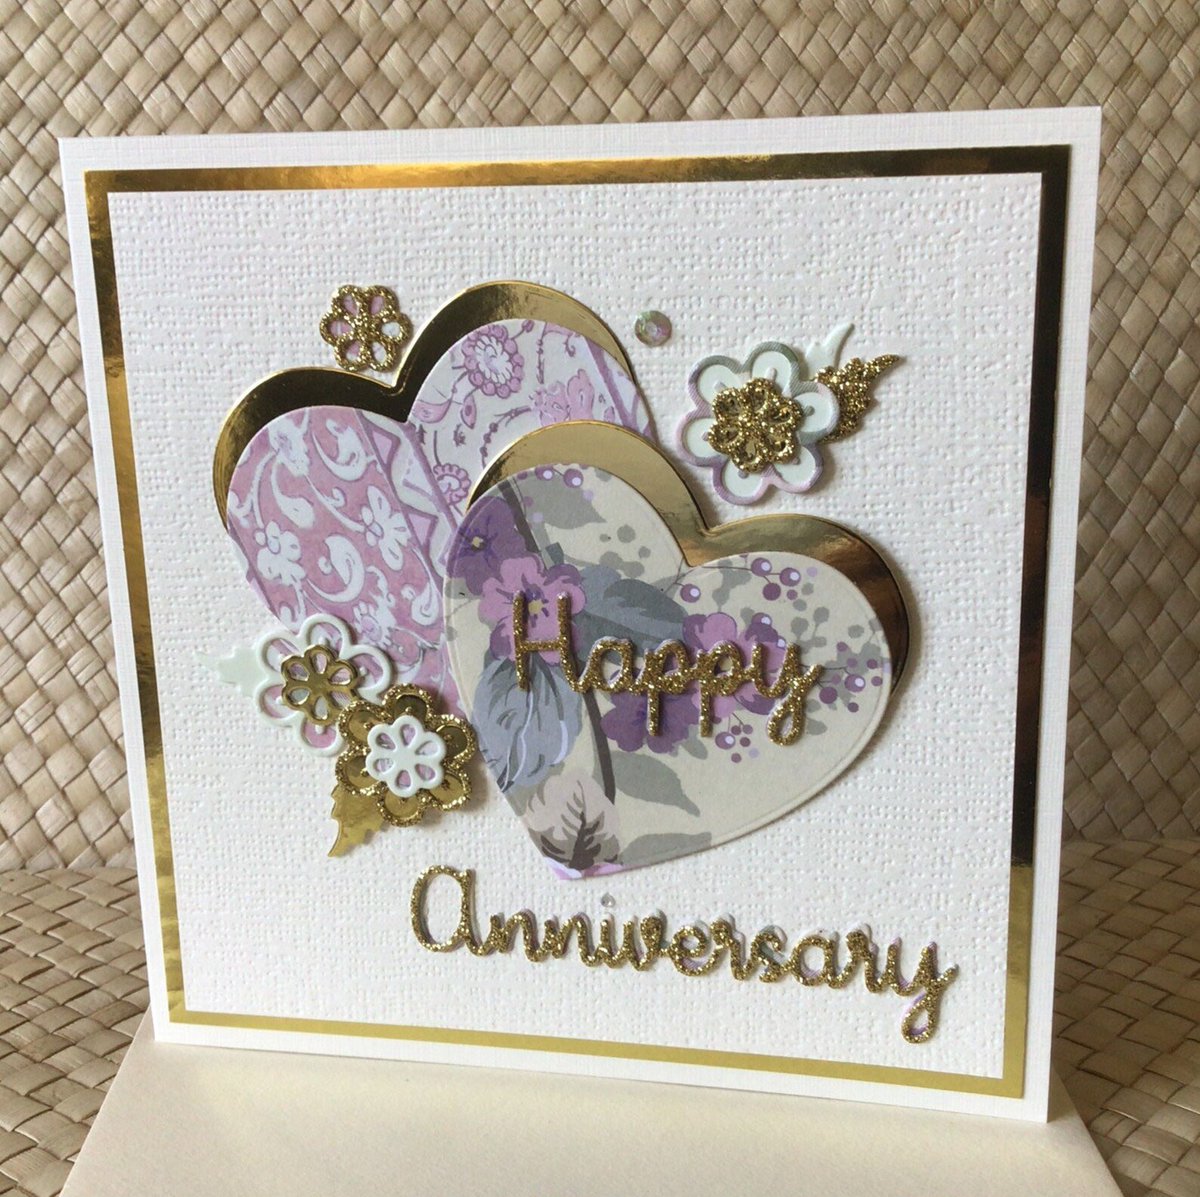 Unique handmade cards for special occasions - commissions welcome 🤗 
Wedding Anniversary Card - Lilac and Gold Hearts and Florals by AllaCartaCards etsy.me/47PyU4F 

#elevenseshour #shopsmalluk #mhhsbd #createuk